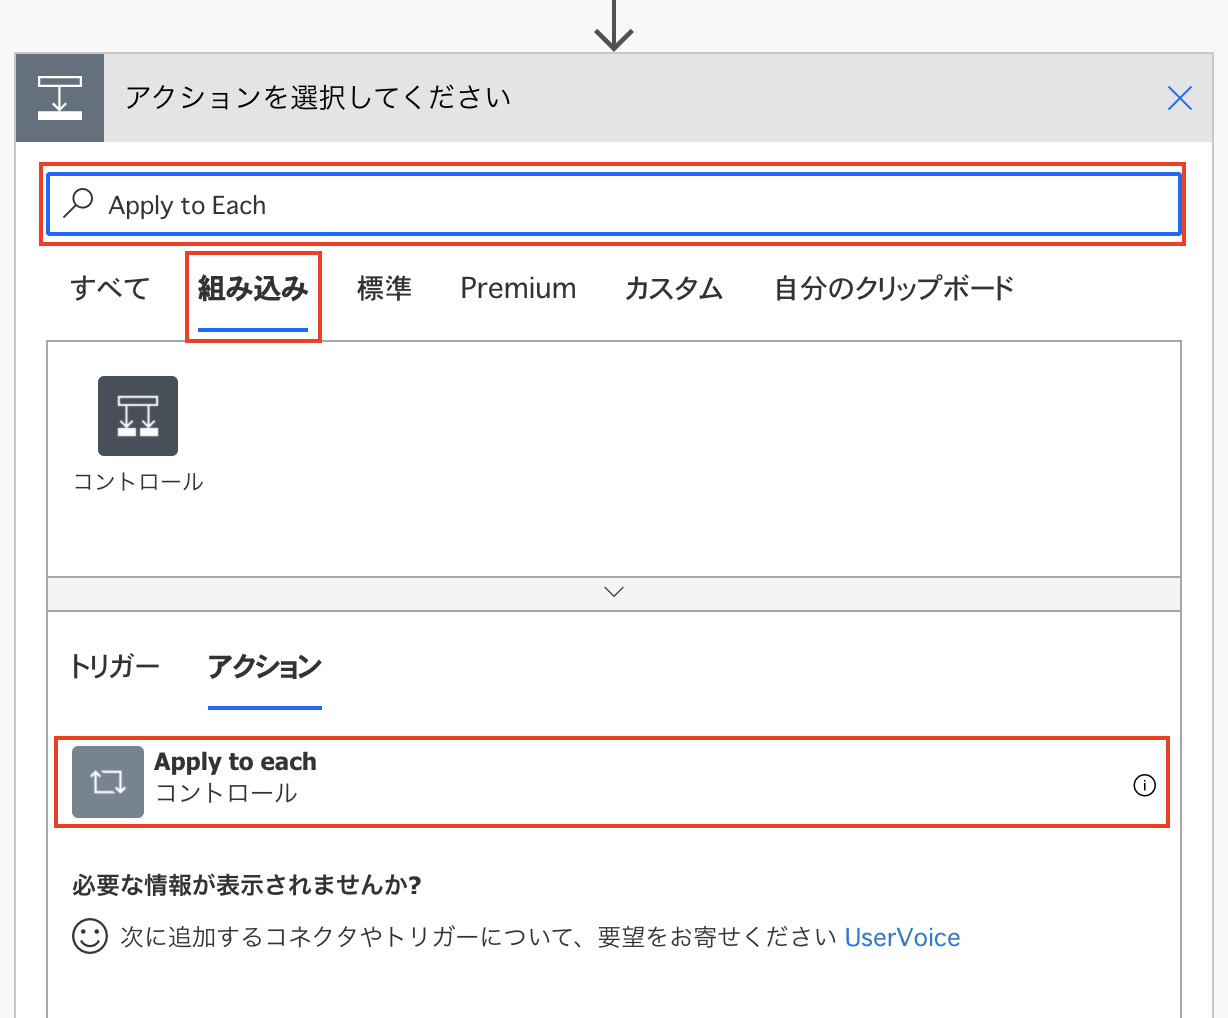 「Apply to Each」を追加する画面